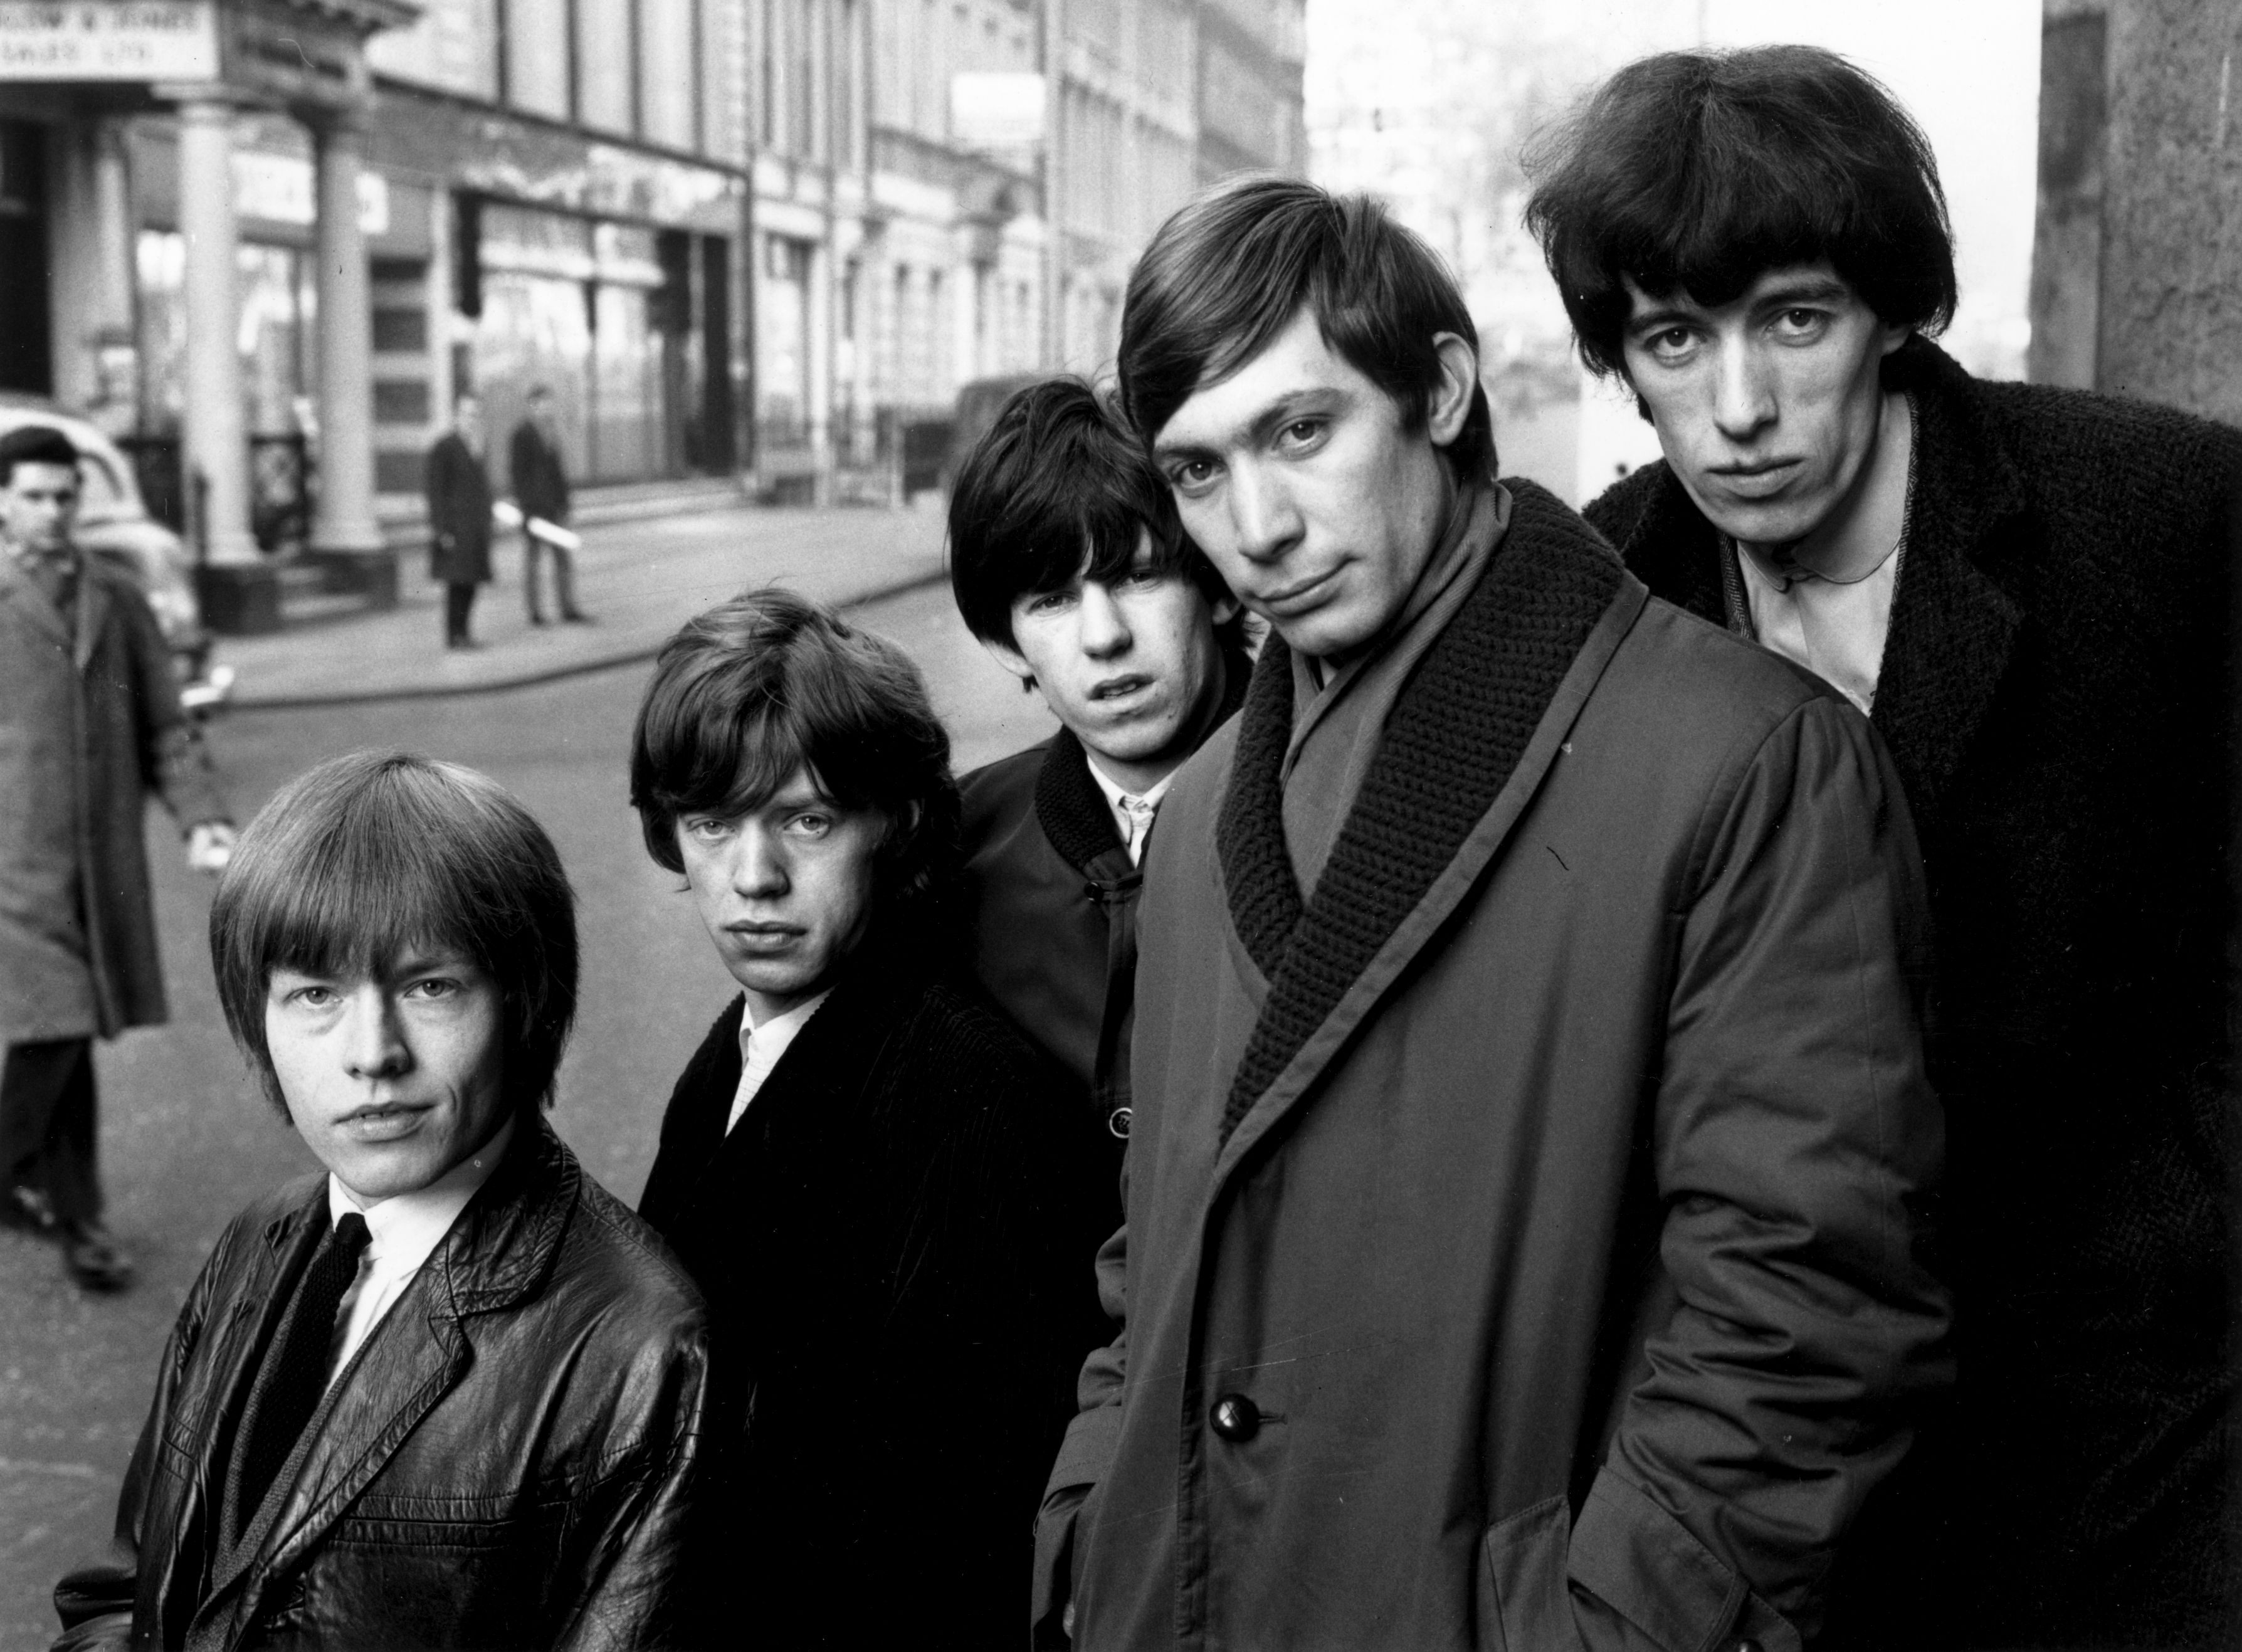 The Rolling Stones in black-and-white